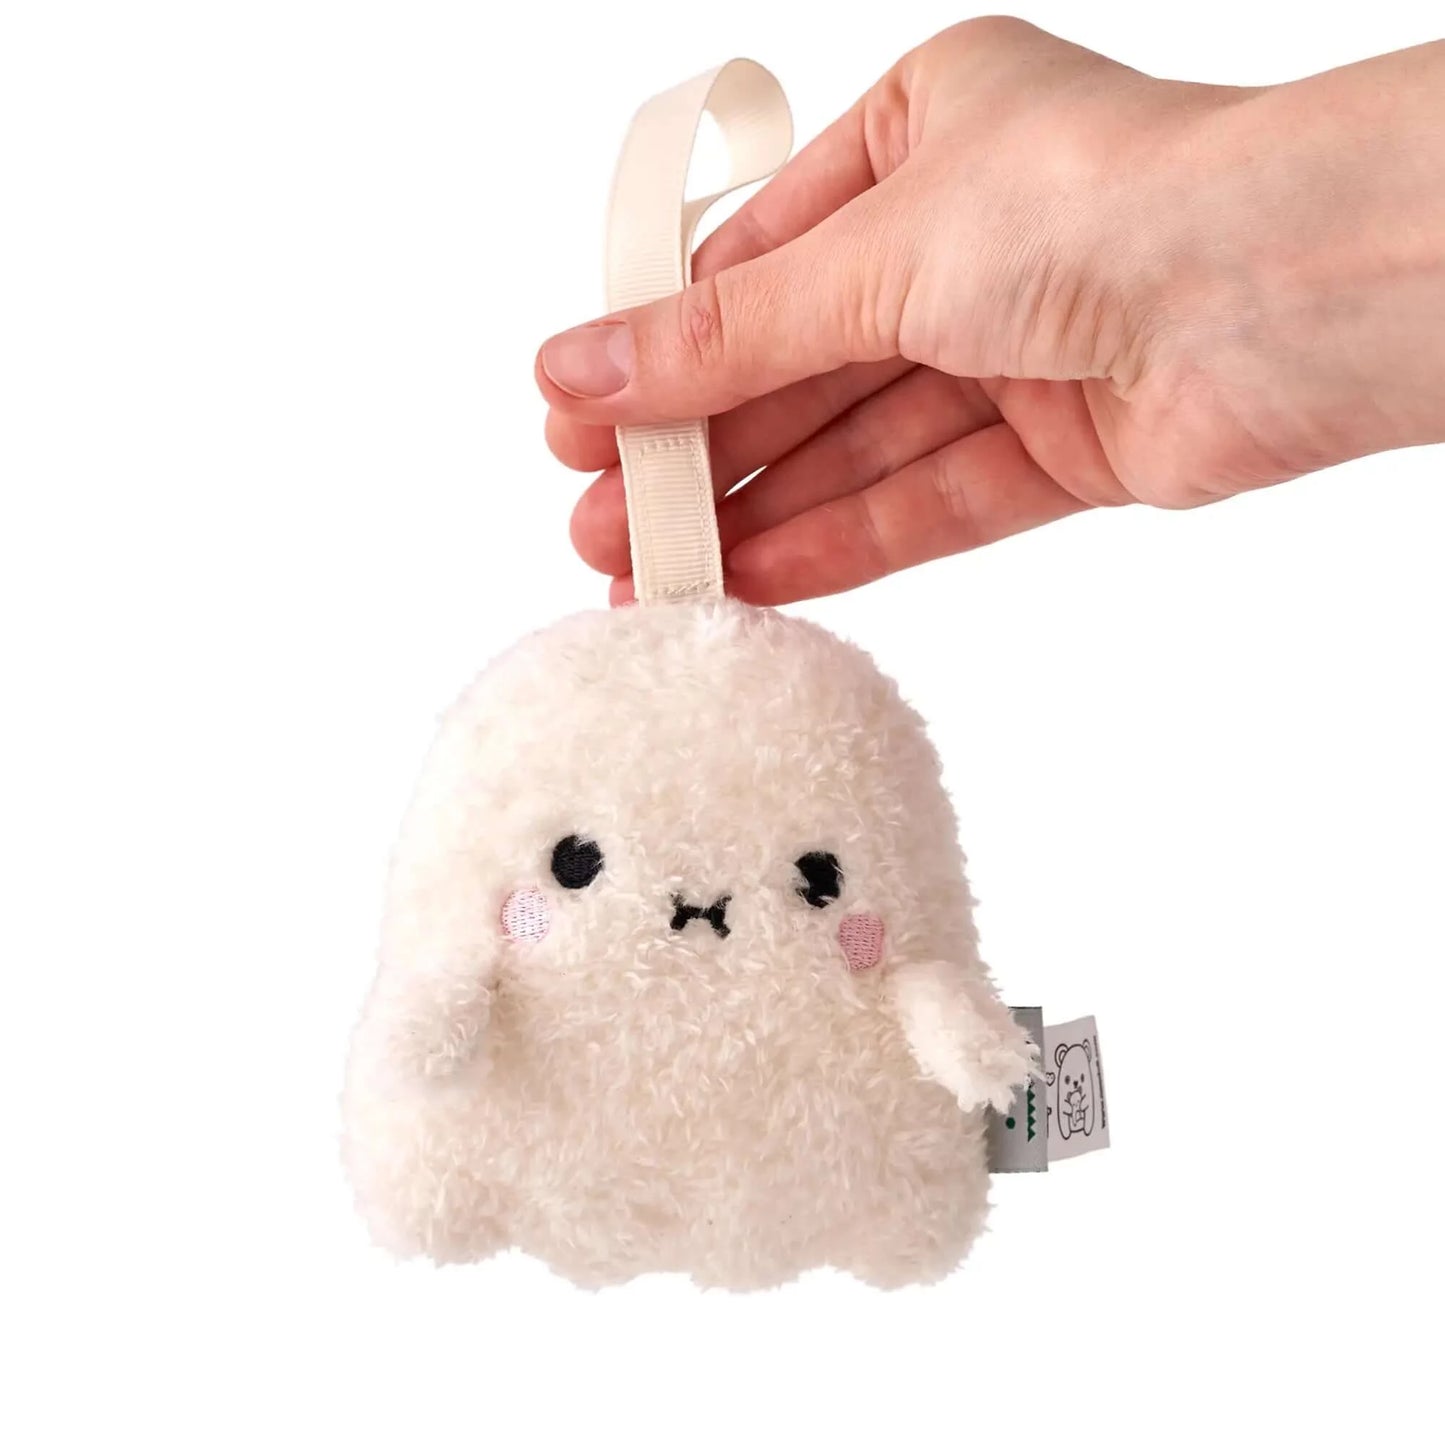 Noodoll Mini Plush Toy - Riceboo the Ghost